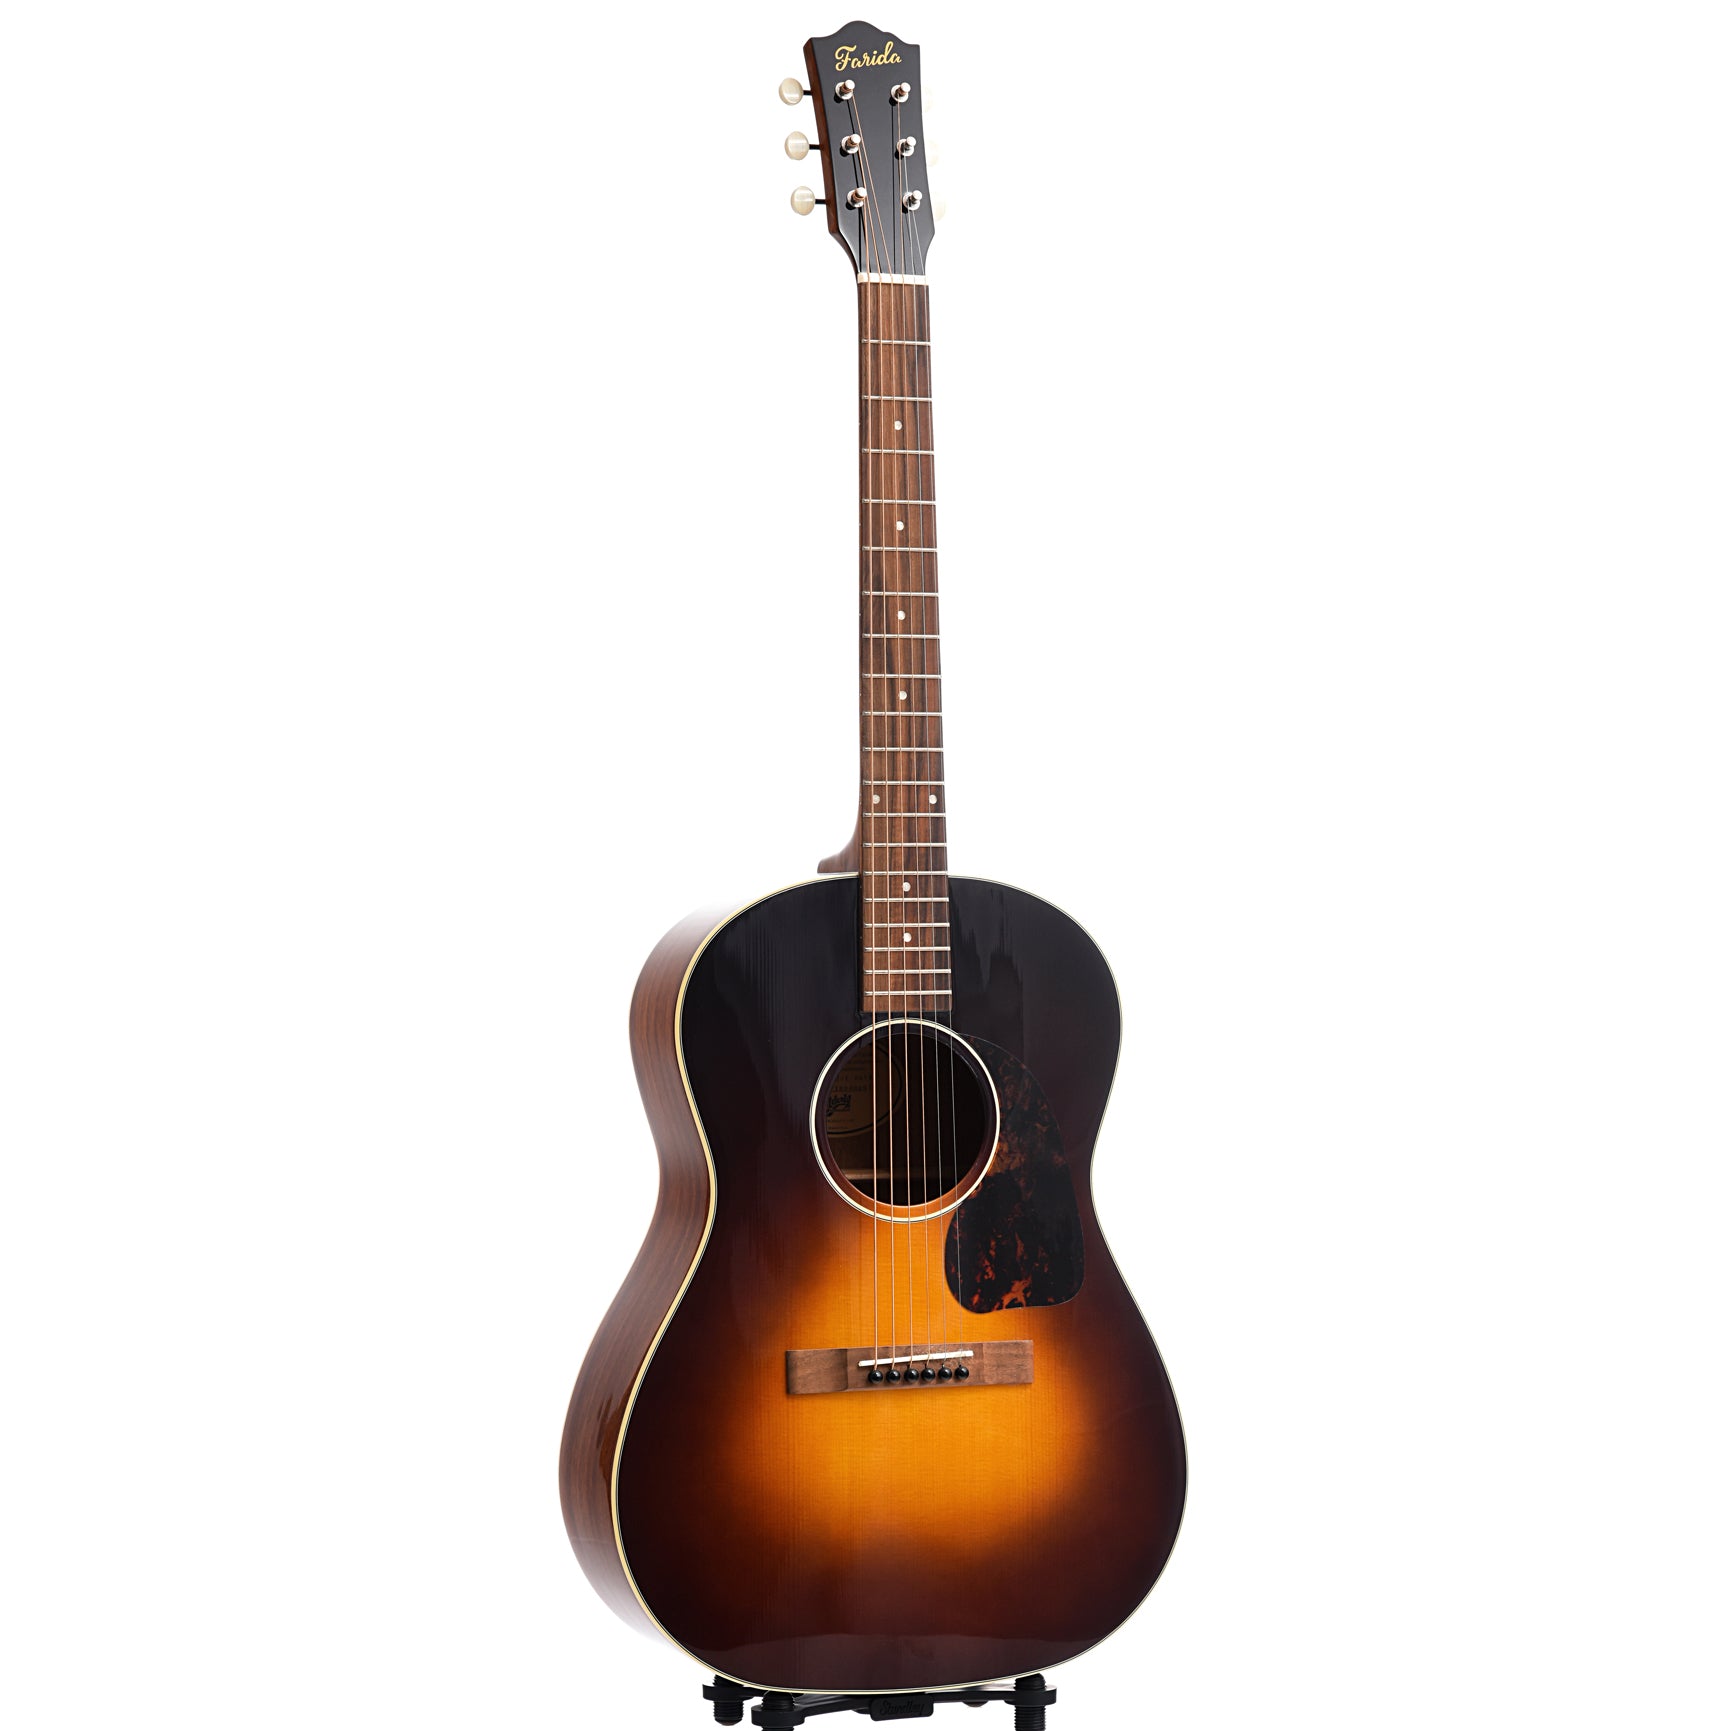 Farida Old Town Series OT-22 VBS Acoustic Guitar – Elderly Instruments